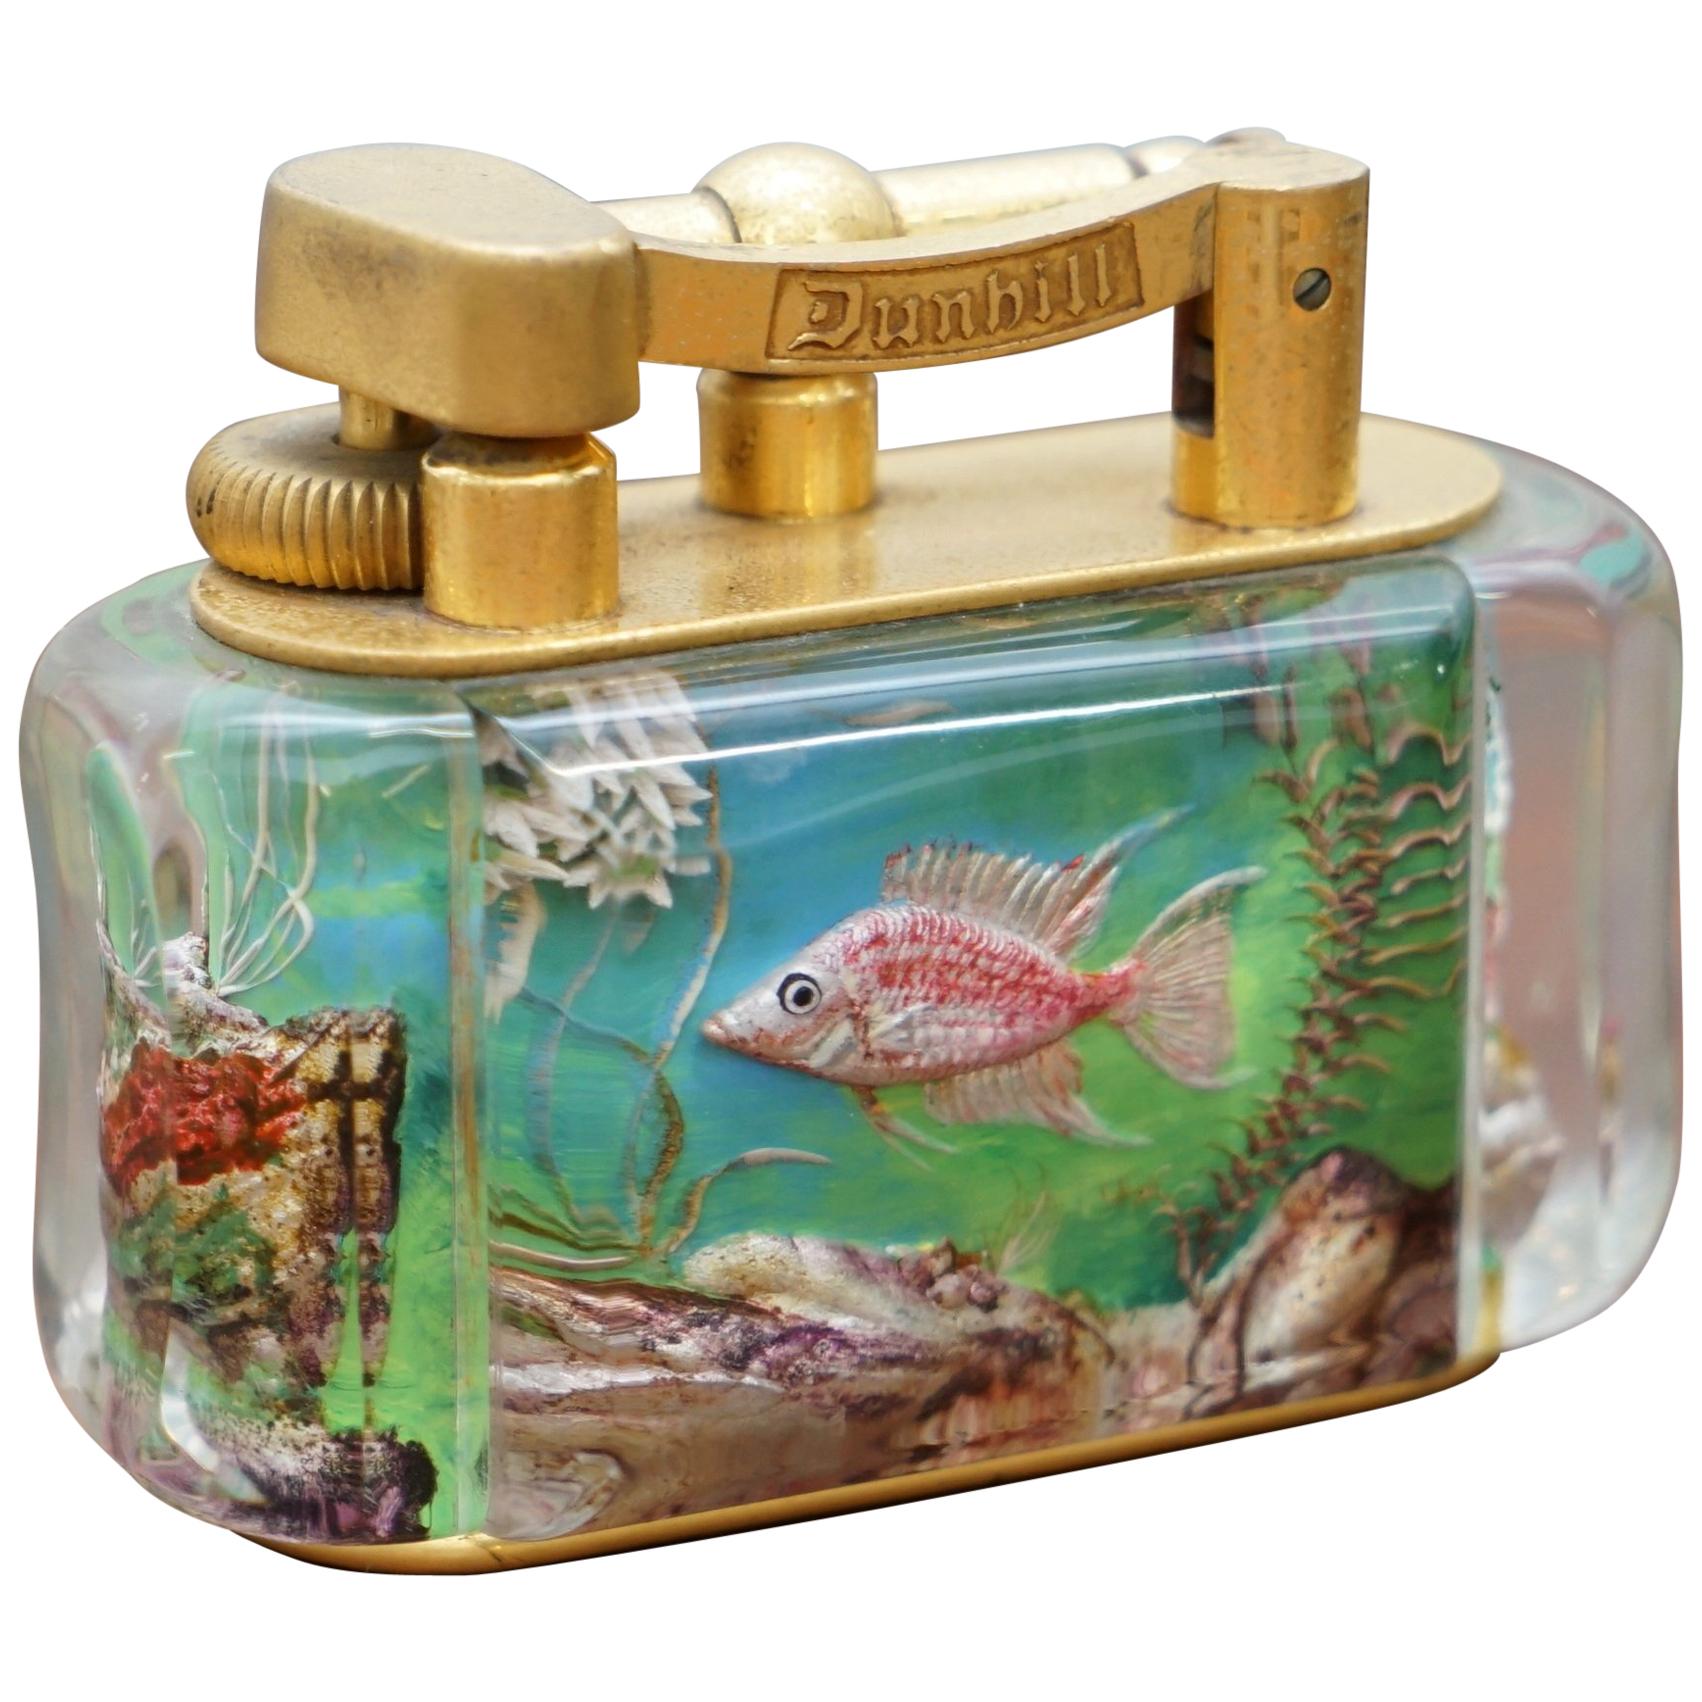 Rare Gold-Plated 1950s Dunhill Aquarium Oversized Table Lighter Made in England